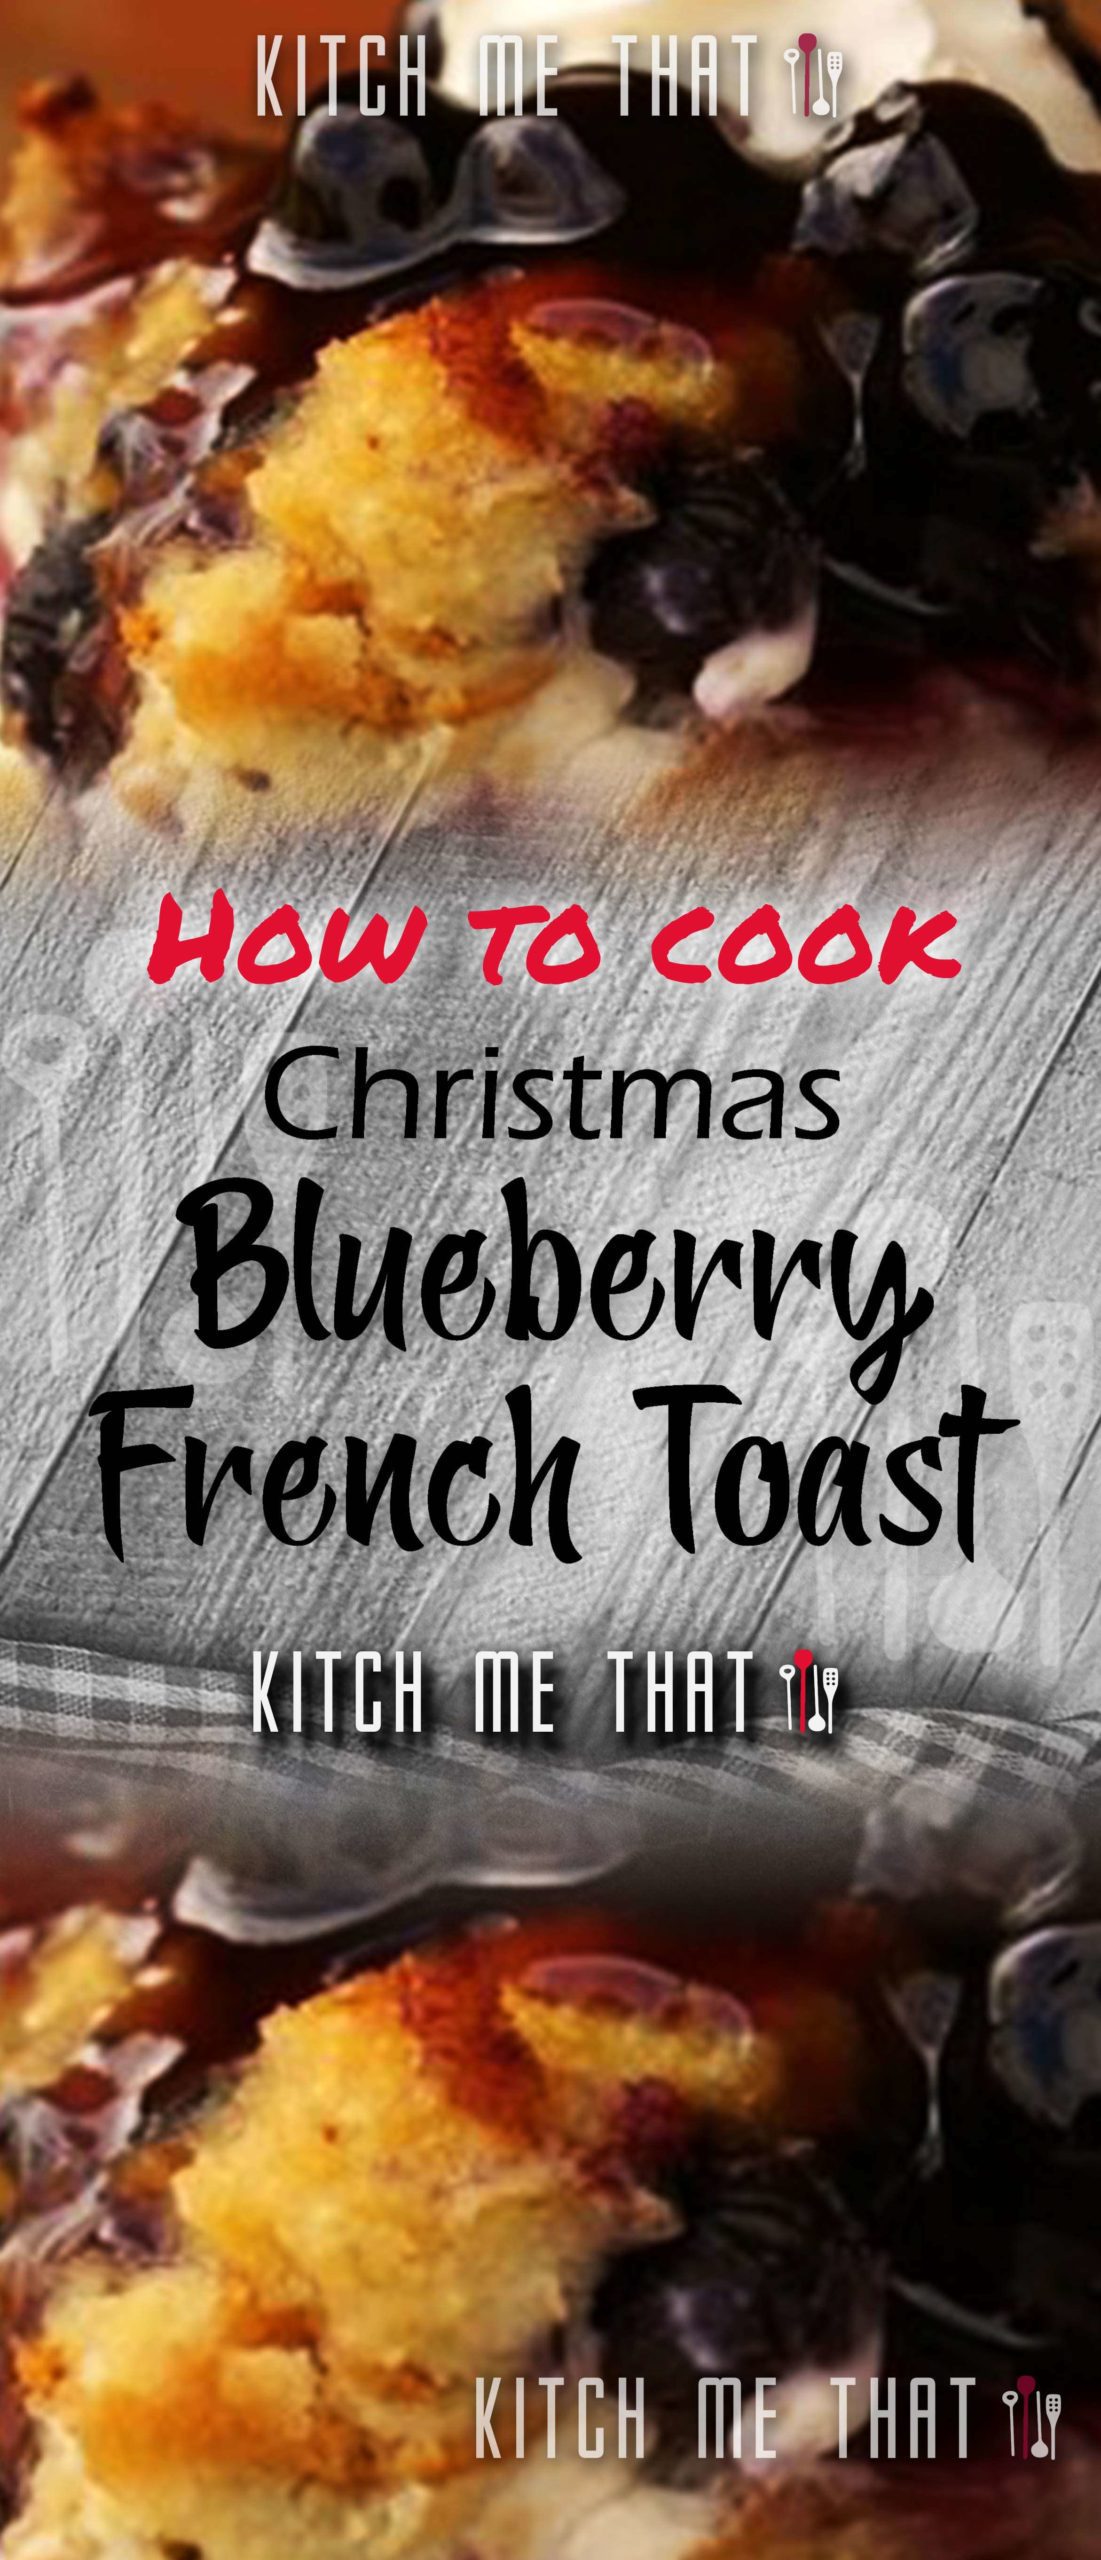 Make-Ahead Christmas Morning Blueberry French Toast